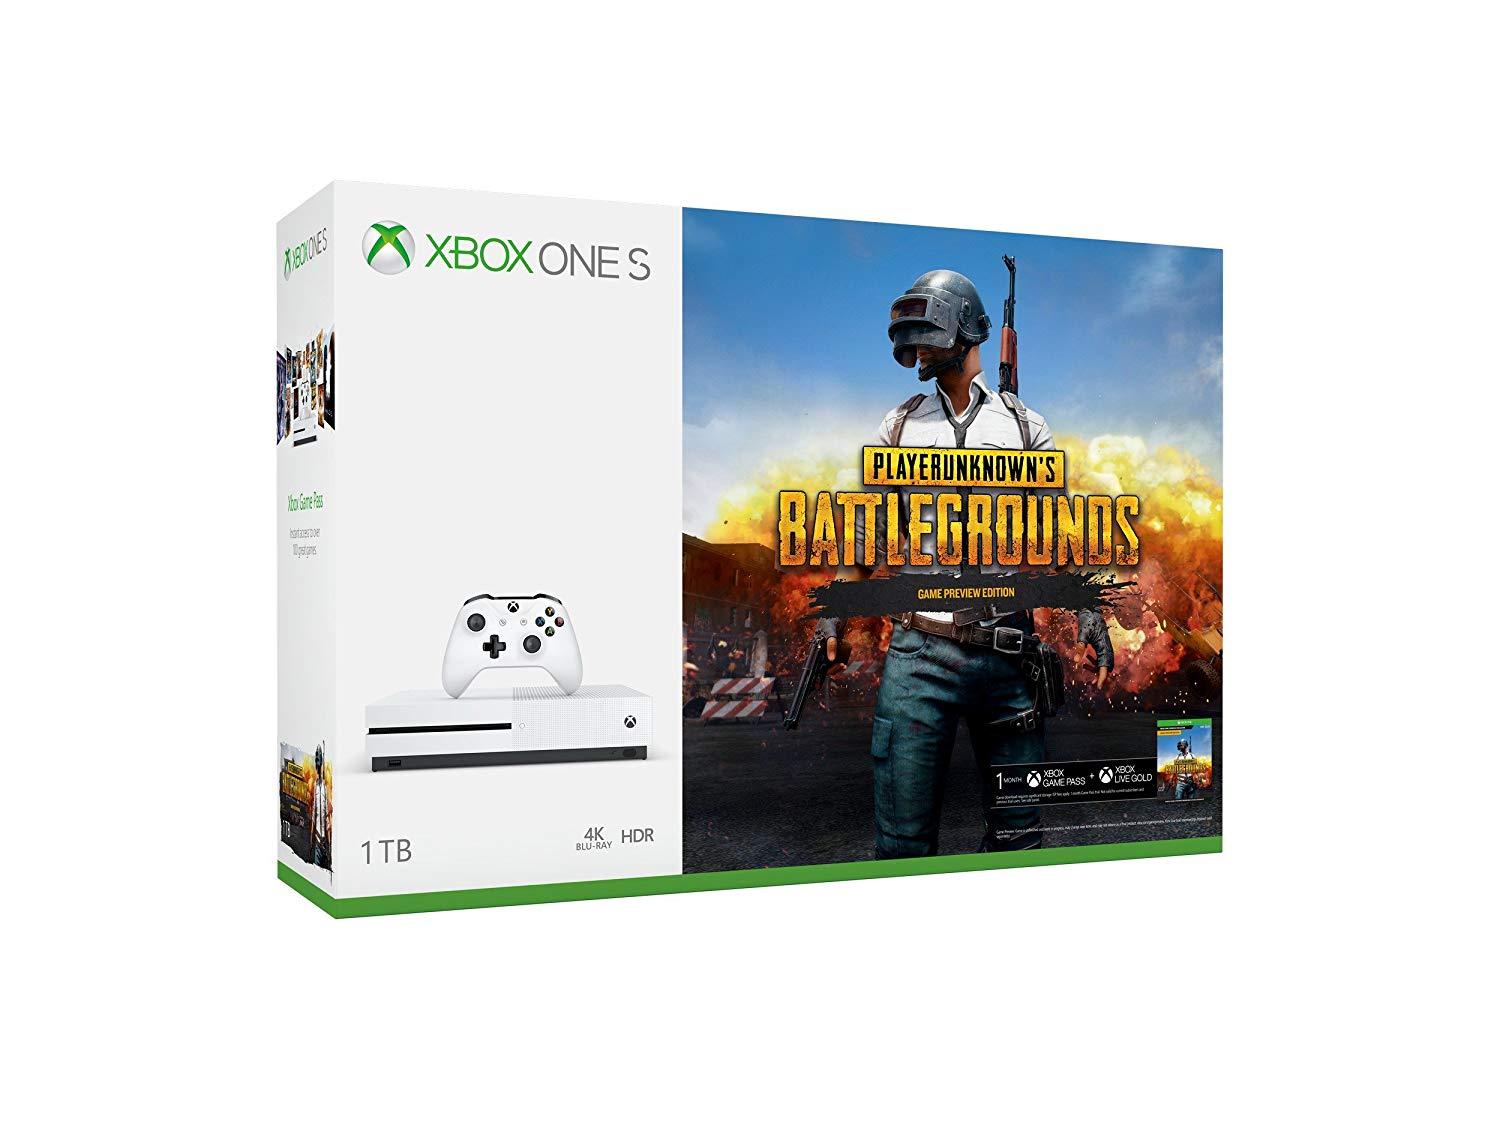 Good News PUBG Lovers!!! The Official PUBG Game is now coming bundled with Microsoft Xbox One S 1TB Console at just Rs.25000 